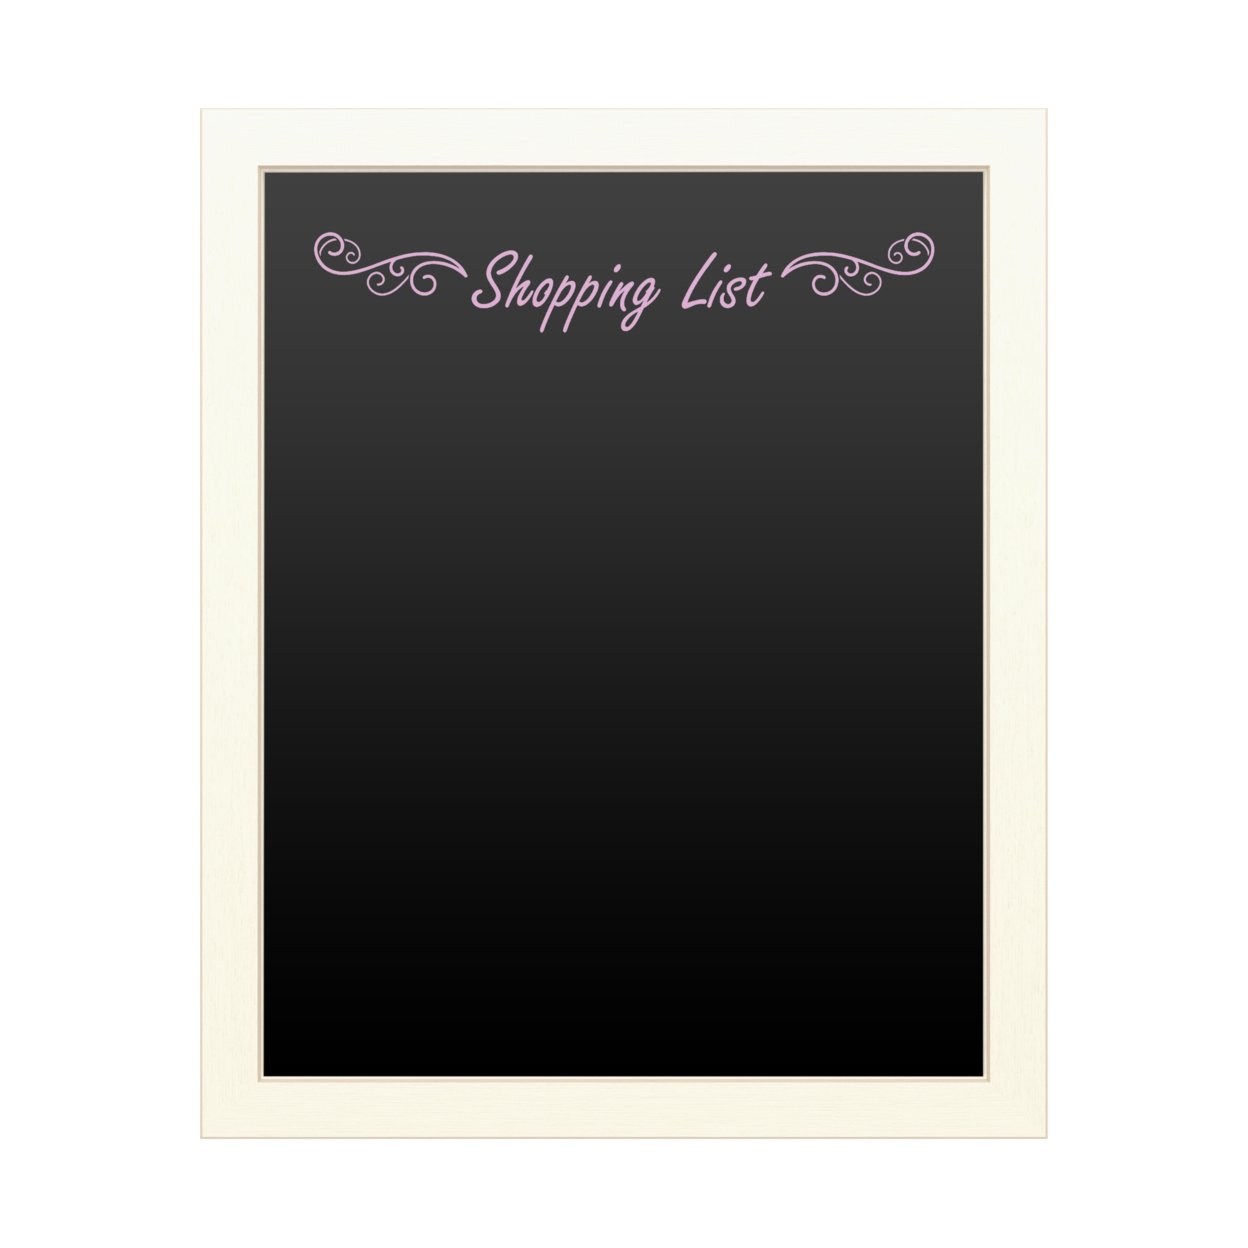 16 X 20 Chalk Board With Printed Artwork - Shopping List 2 White Board - Ready To Hang Chalkboard